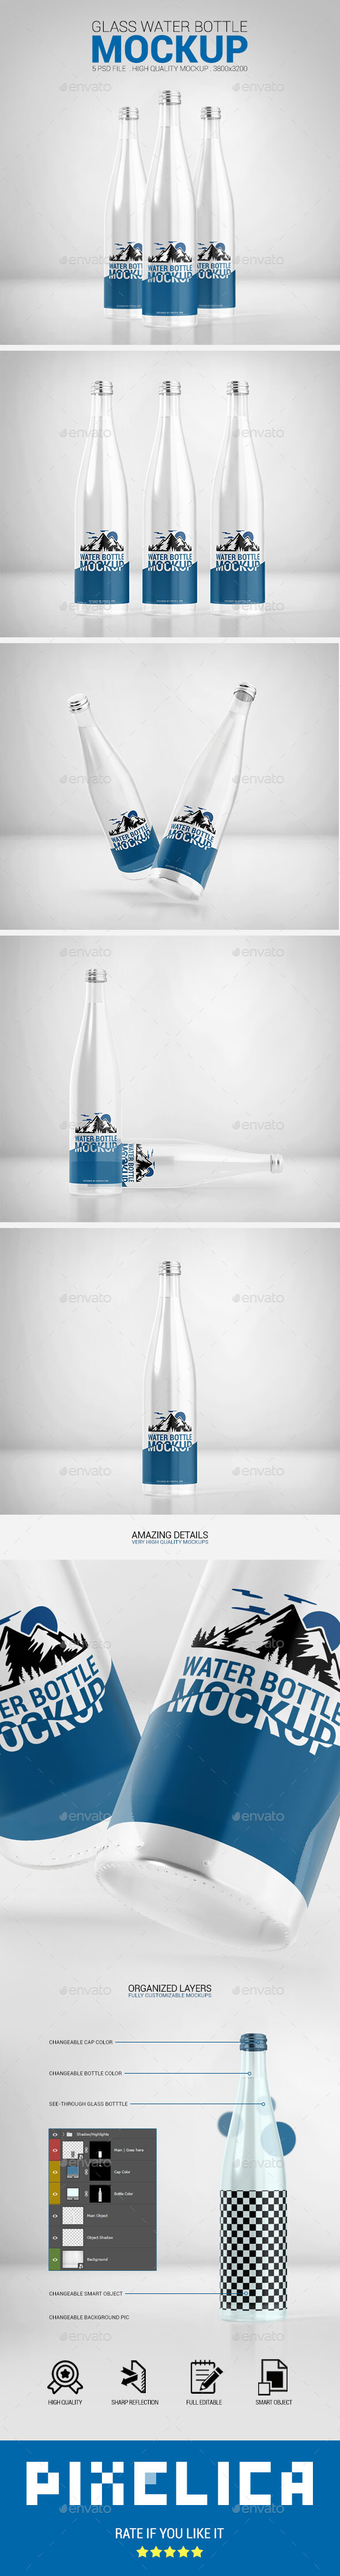 Download Glass Water Bottle Mockup By Pixelica21 Graphicriver